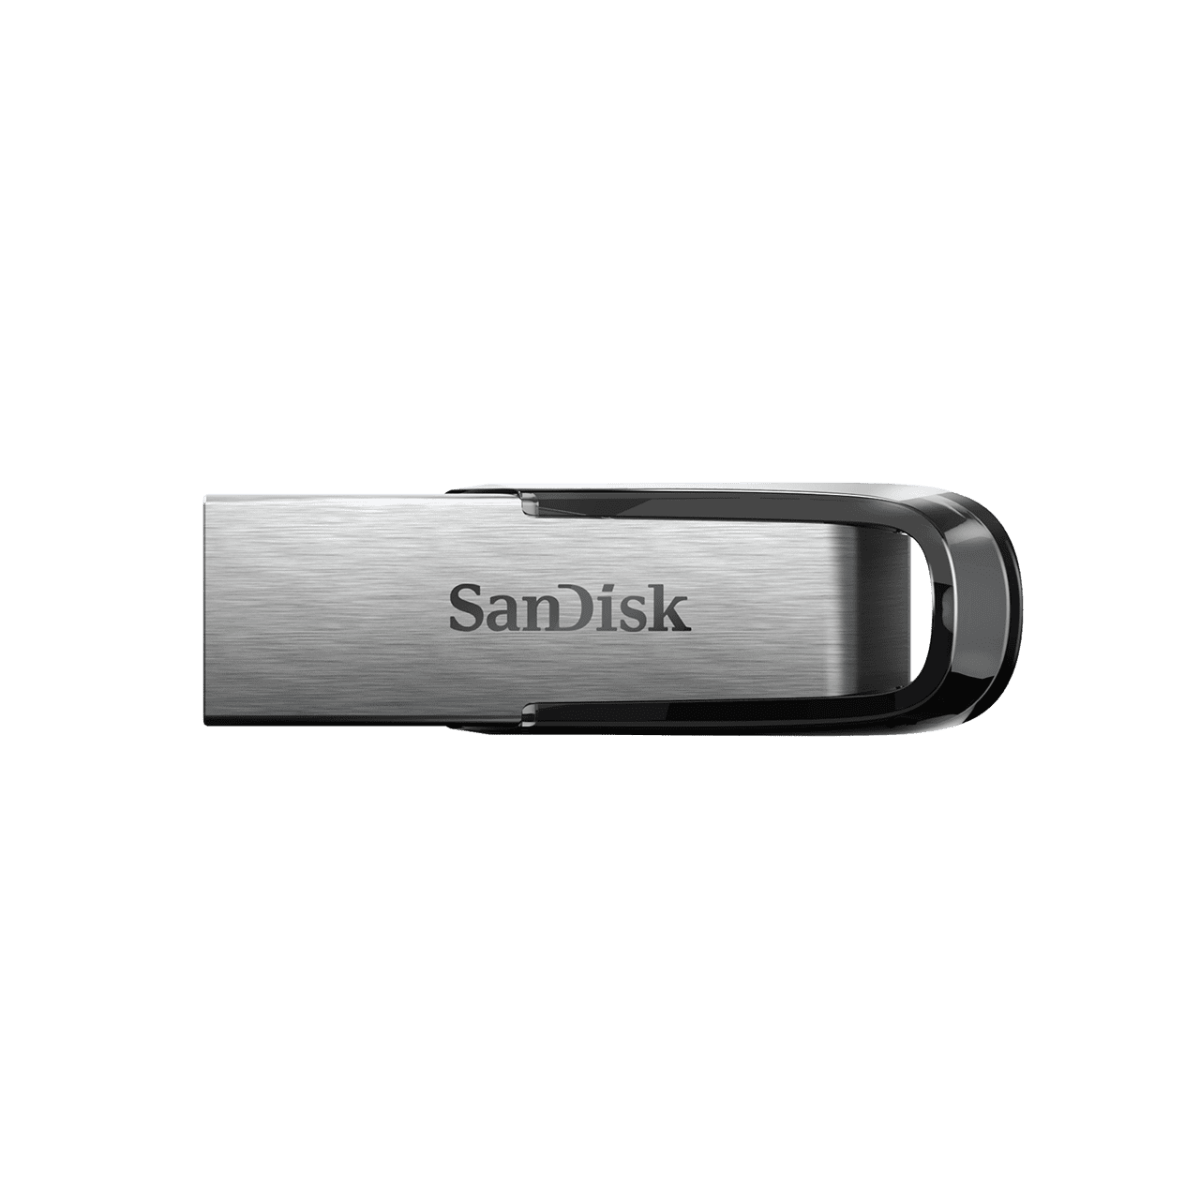 Ultra Flair Usb 3 0 Front.png.thumb .1280.1280 Sandisk &Lt;Div Class=&Quot;Inheritpara Mb-4&Quot;&Gt; The Sandisk Ultra Flair™ Usb 3.0 Flash Drive Moves Your Files Fast. Spend Less Time Waiting To Transfer Files And Enjoy High-Speed Usb 3.0 Performance Of Up To 150Mb/S&Lt;A Class=&Quot;Disclosure&Quot; Href=&Quot;Https://Shop.westerndigital.com/Products/Usb-Flash-Drives/Sandisk-Ultra-Flair-Usb-3-0#Disclosures&Quot; Target=&Quot;_Self&Quot; Rel=&Quot;Noopener Noreferrer&Quot; Aria-Labelledby=&Quot;Disclosures&Quot;&Gt;&Lt;Sup&Gt;**&Lt;/Sup&Gt;&Lt;/A&Gt;. Its Durable And Sleek Metal Casing Is Tough Enough To Handle Knocks With Style. And, With Password Protection, You Can Rest Assured That Your Private Files Stay Private&Lt;A Class=&Quot;Disclosure&Quot; Href=&Quot;Https://Shop.westerndigital.com/Products/Usb-Flash-Drives/Sandisk-Ultra-Flair-Usb-3-0#Disclosures&Quot; Target=&Quot;_Self&Quot; Rel=&Quot;Noopener Noreferrer&Quot; Aria-Labelledby=&Quot;Disclosures&Quot;&Gt;&Lt;Sup&Gt;1&Lt;/Sup&Gt;&Lt;/A&Gt;. Store Your Files In Style With The Sandisk Ultra Flair Usb 3.0 Flash Drive. &Lt;Strong&Gt;Warranty&Lt;/Strong&Gt; The Sandisk Ultra Flair Usb 3.0 Flash Drive Is Backed By A Five-Year Manufacturer Warranty&Lt;A Class=&Quot;Disclosure&Quot; Href=&Quot;Https://Shop.westerndigital.com/Products/Usb-Flash-Drives/Sandisk-Ultra-Flair-Usb-3-0#Disclosures&Quot; Target=&Quot;_Self&Quot; Rel=&Quot;Noopener Noreferrer&Quot; Aria-Labelledby=&Quot;Disclosures&Quot;&Gt;&Lt;Sup&Gt;2&Lt;/Sup&Gt;&Lt;/A&Gt; &Lt;/Div&Gt; Sandisk Sandisk Ultra Flair Usb 3.0 Flash Drive (32Gb)